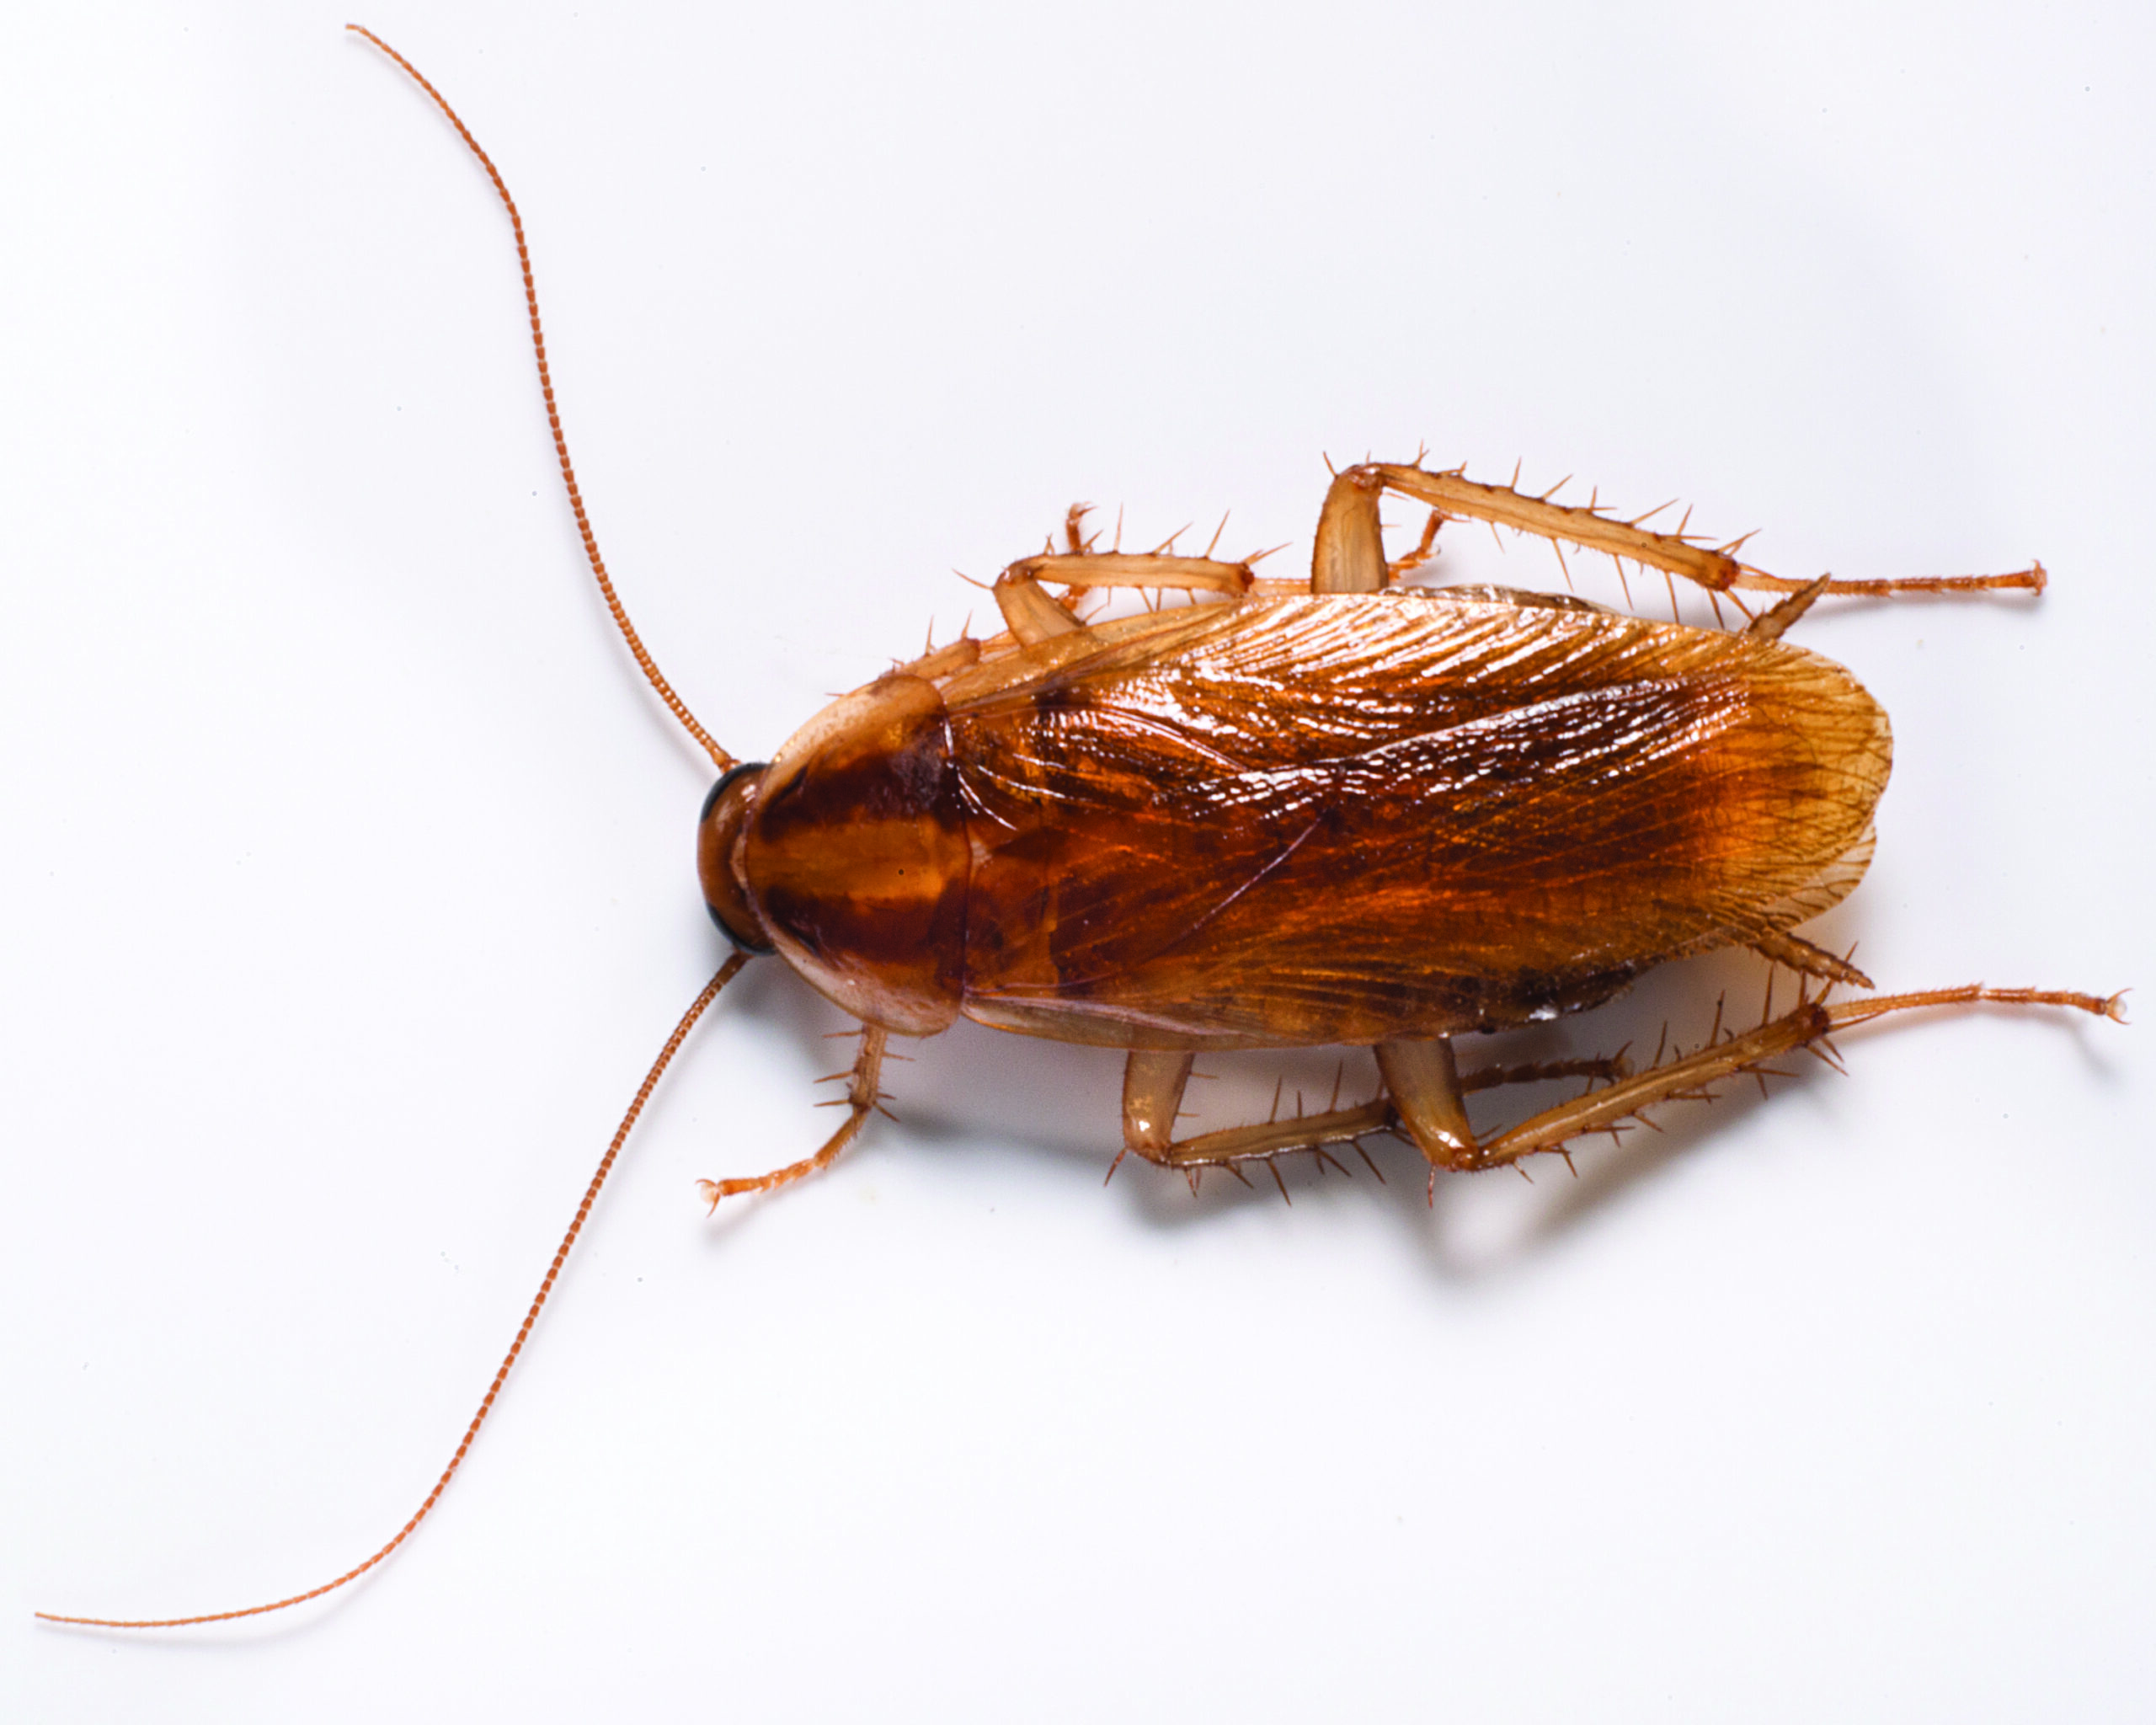 German Roach Clarks Pest How To Get Rid Of Roaches